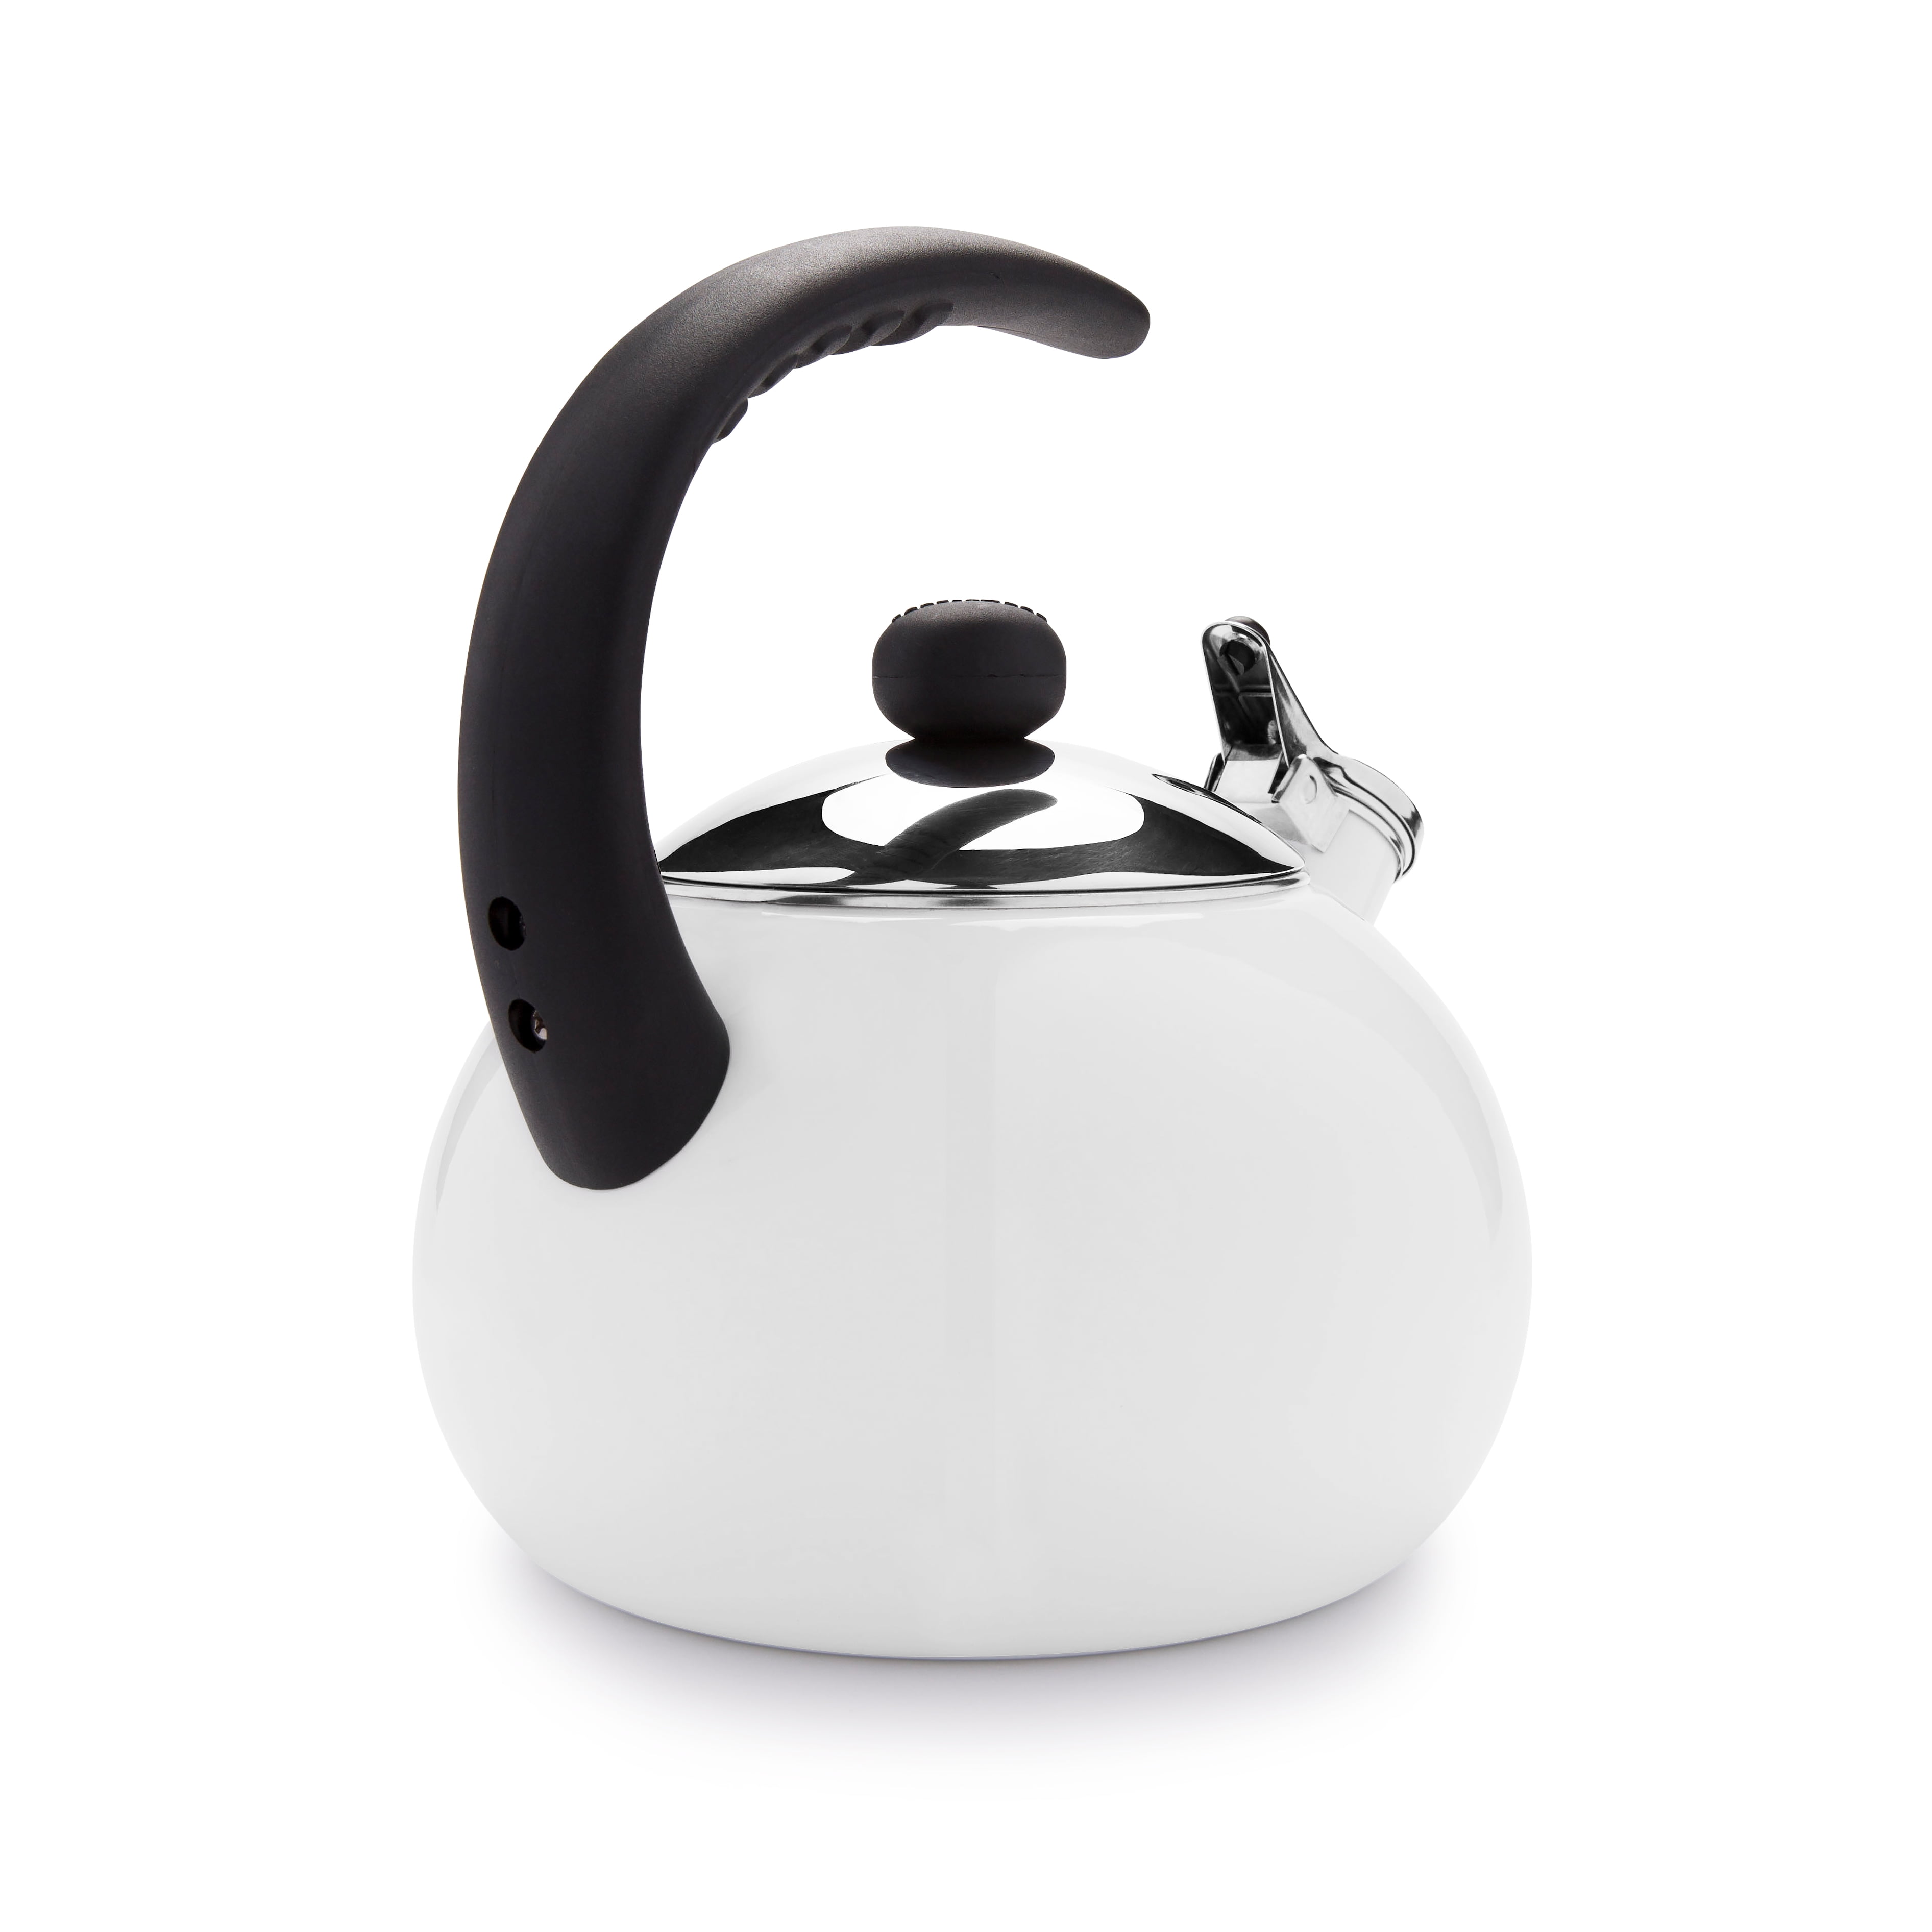 Farberware Omega Tea Kettle, Whistling Tea Pot, Works For All Stovetops,  Porcelain Enamel on Carbon Steel, BPA-Free, Rust-Proof, Stay Cool Handle,  2.75 quart (11 cups) Capacity(Gray): Home & Kitchen 